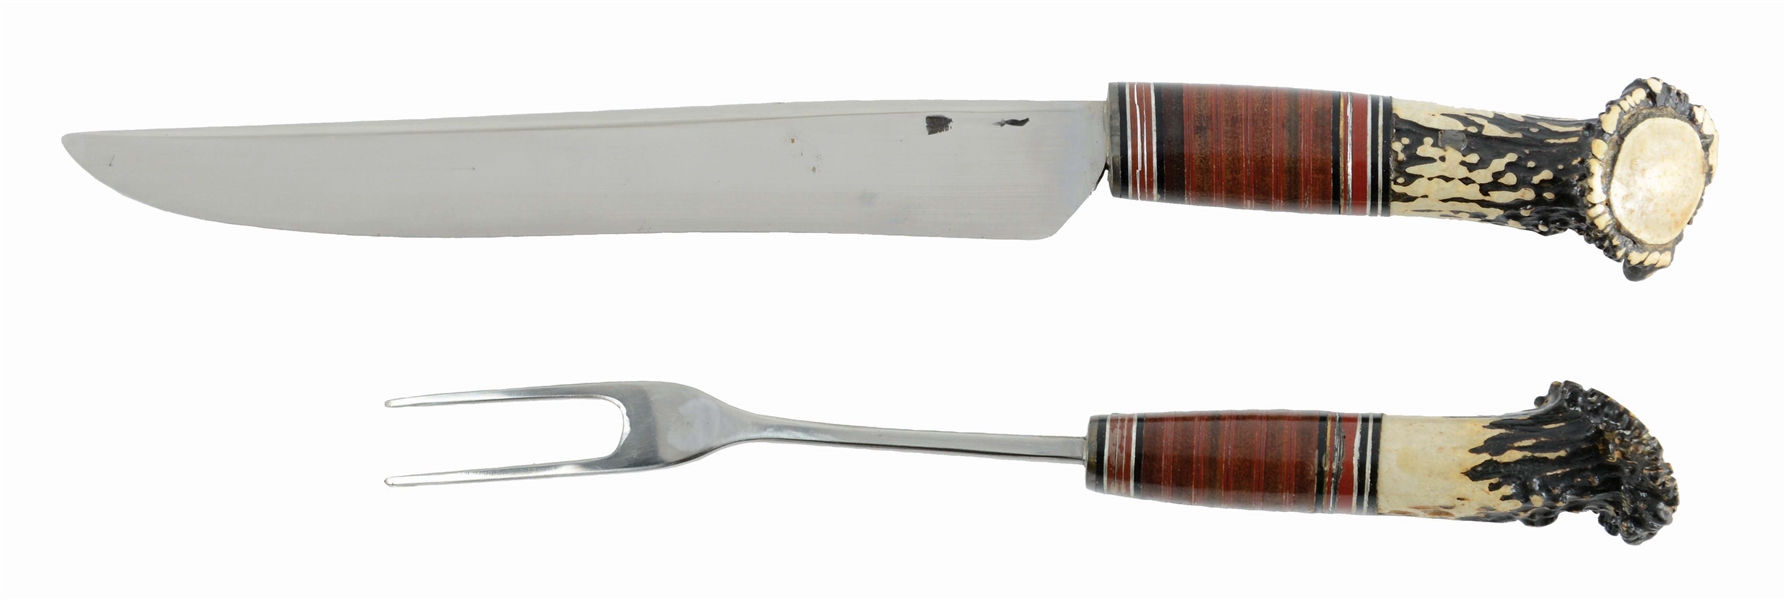 RARE AND DESIRABLE BILL SCAGEL TWO-PIECE CROWN STAG CARVING SET.